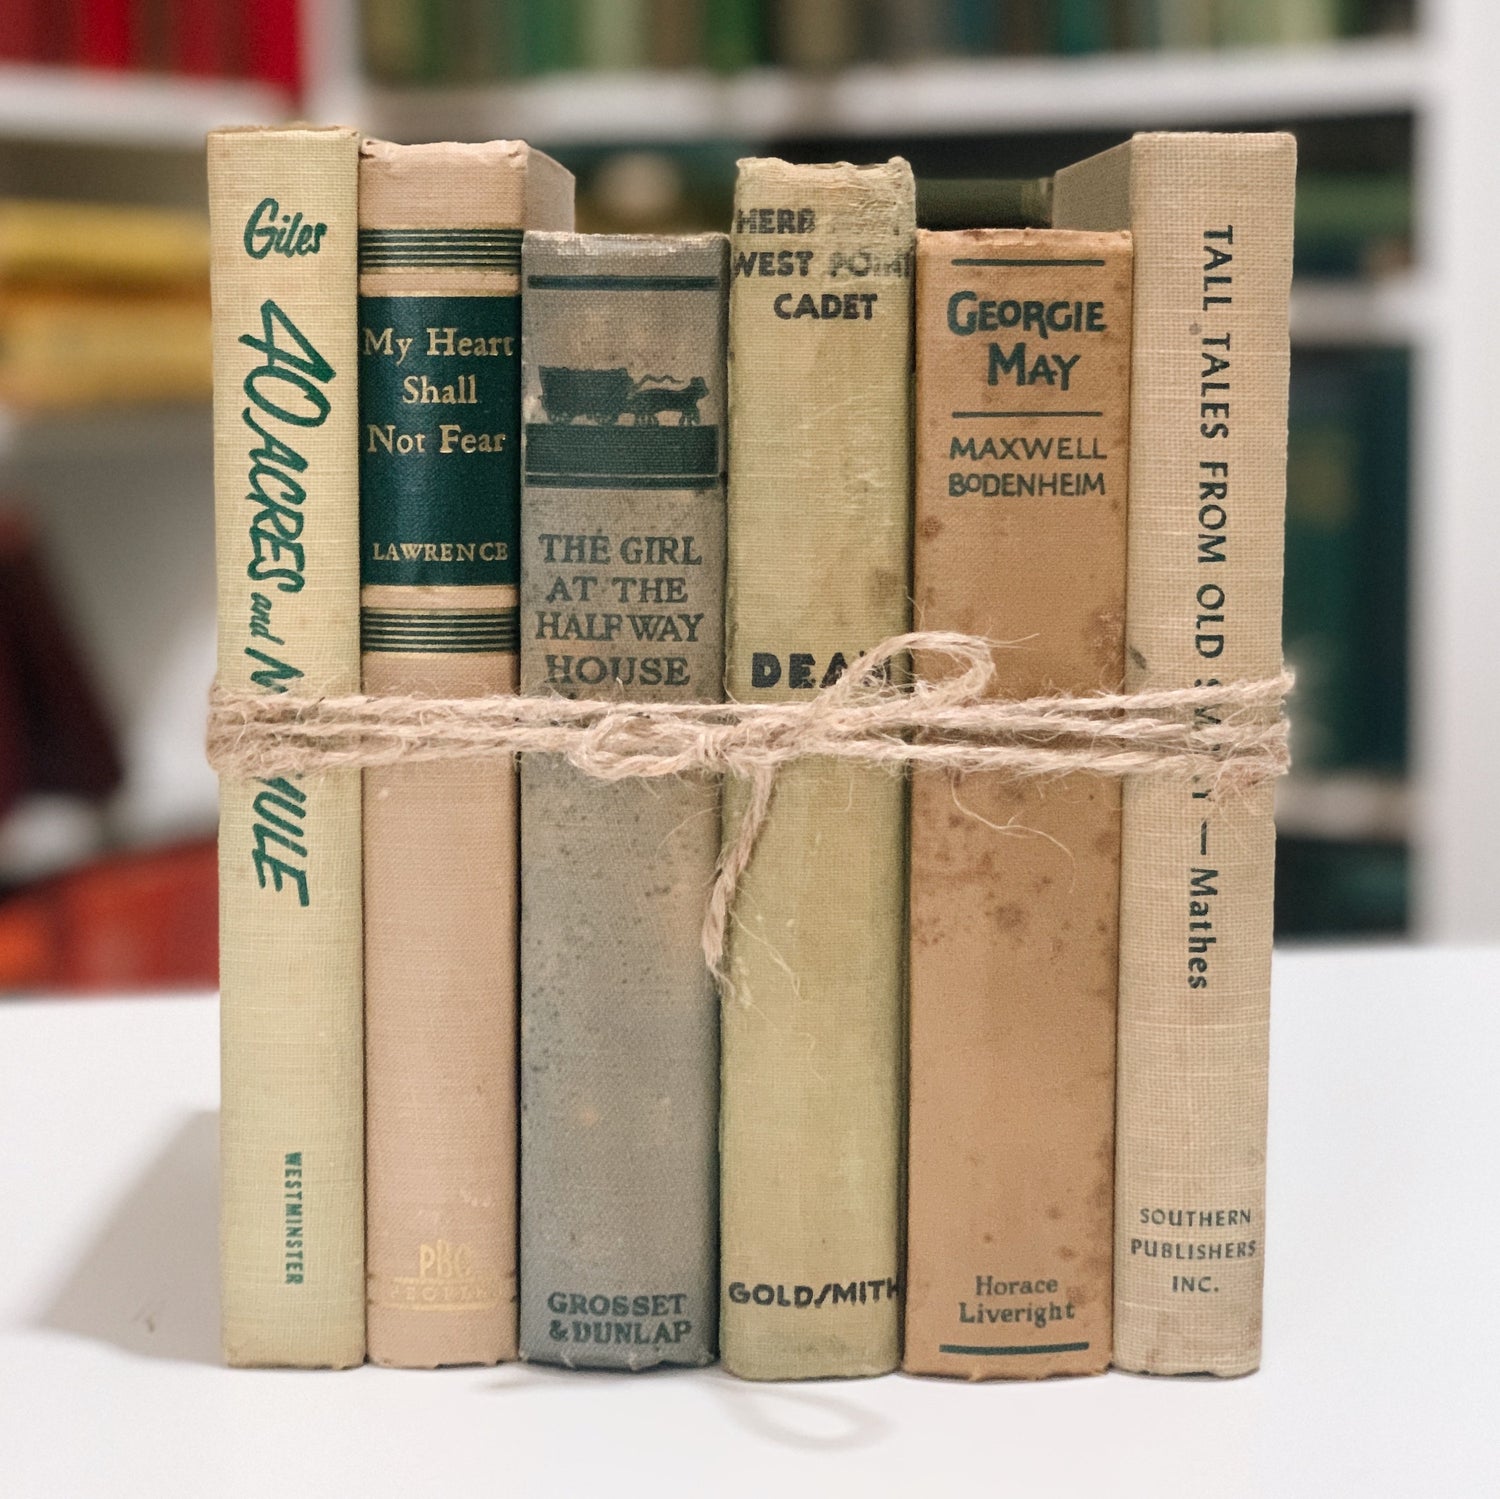 Beige and Green Vintage Decorative Books, Shabby Distressed Bookshelf Decor, Aesthetic Books for Home Office Decor